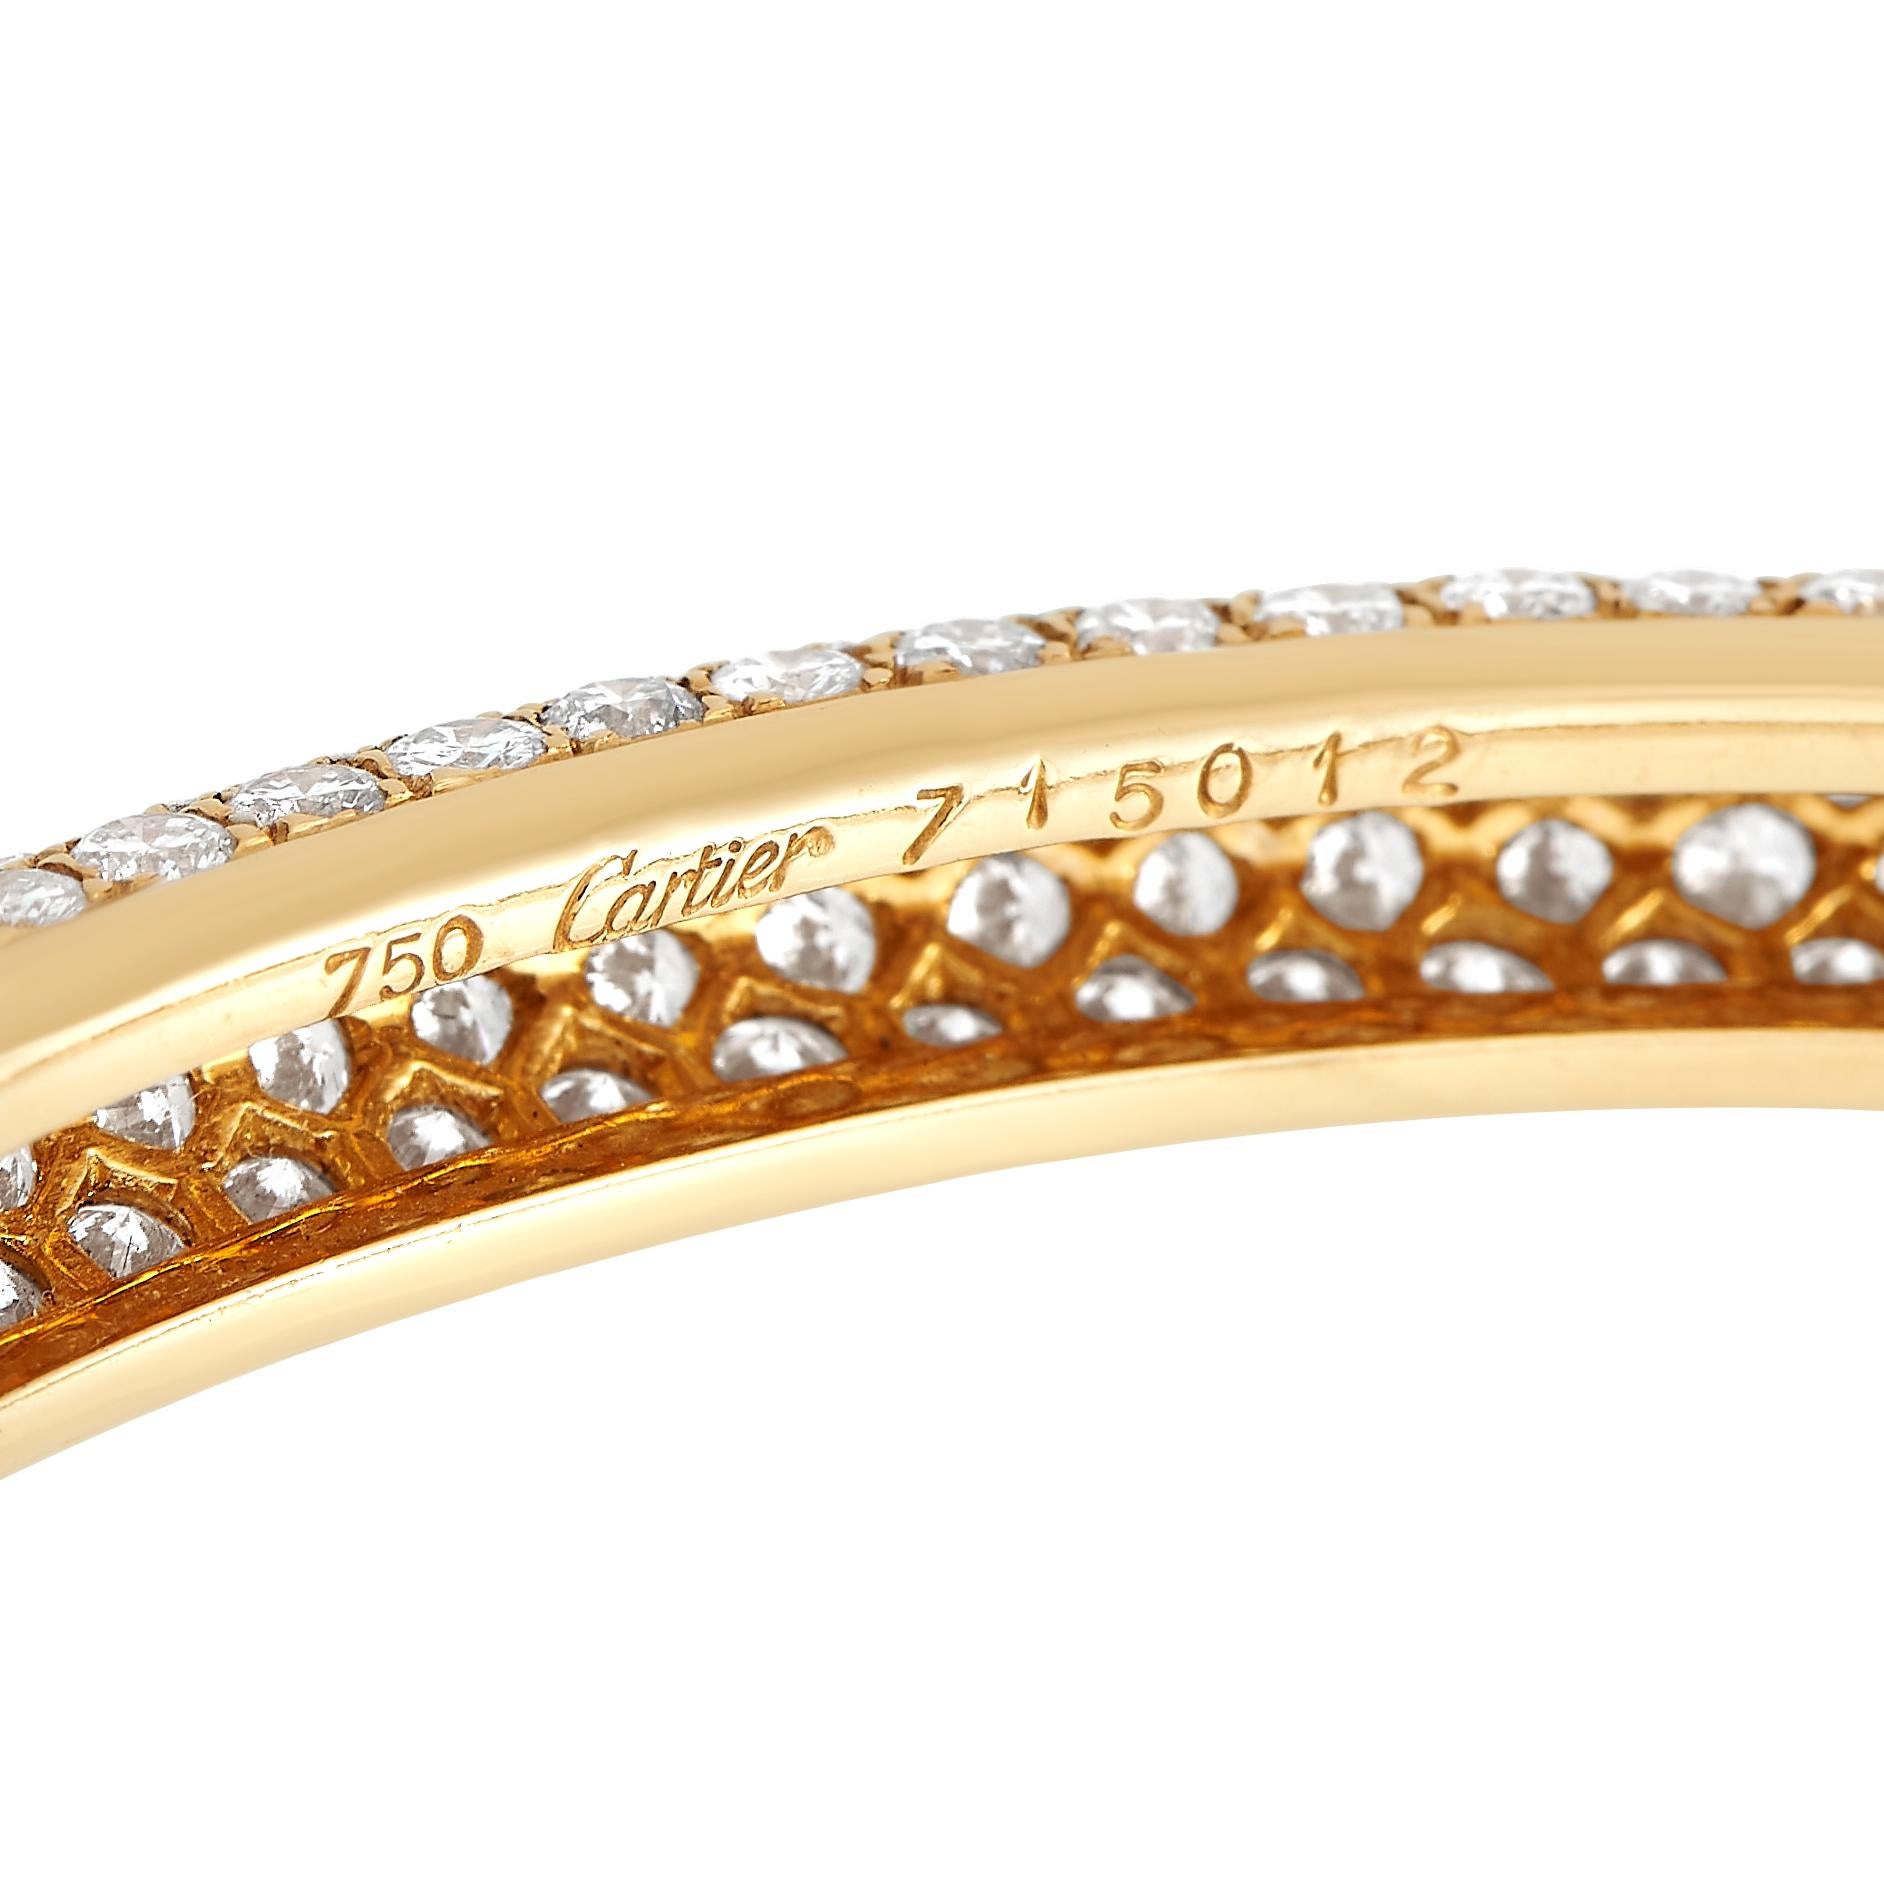 Cartier 18K Yellow Gold 13.11ct Diamond Pave Bracelet In Excellent Condition For Sale In Southampton, PA